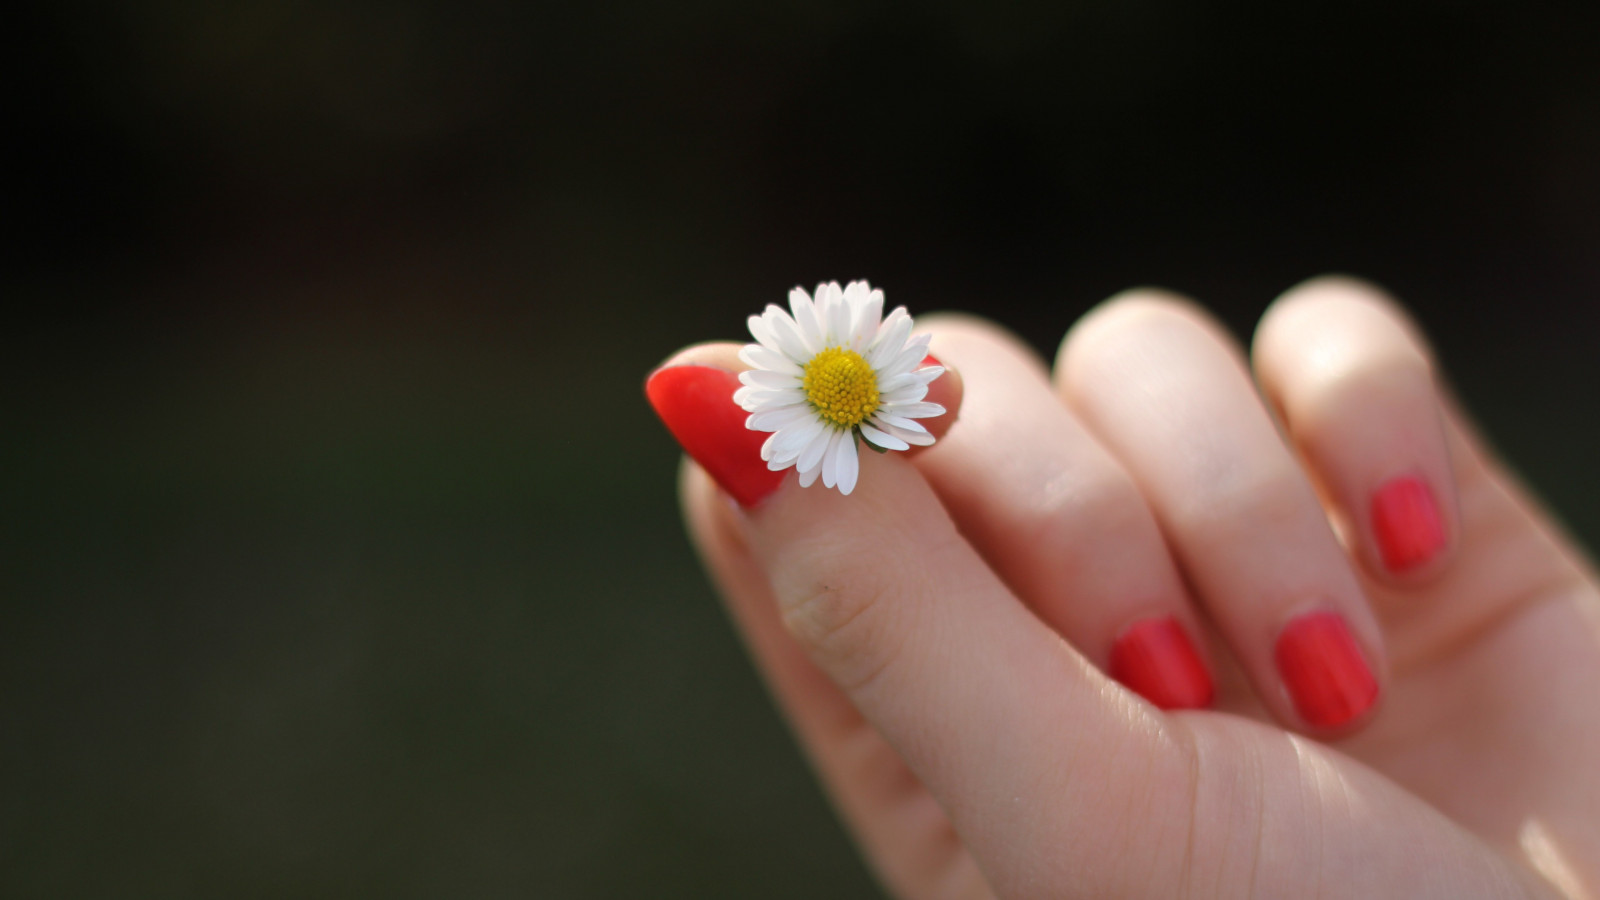 Girl with red nails and a daisy flower wallpaper 1600x900